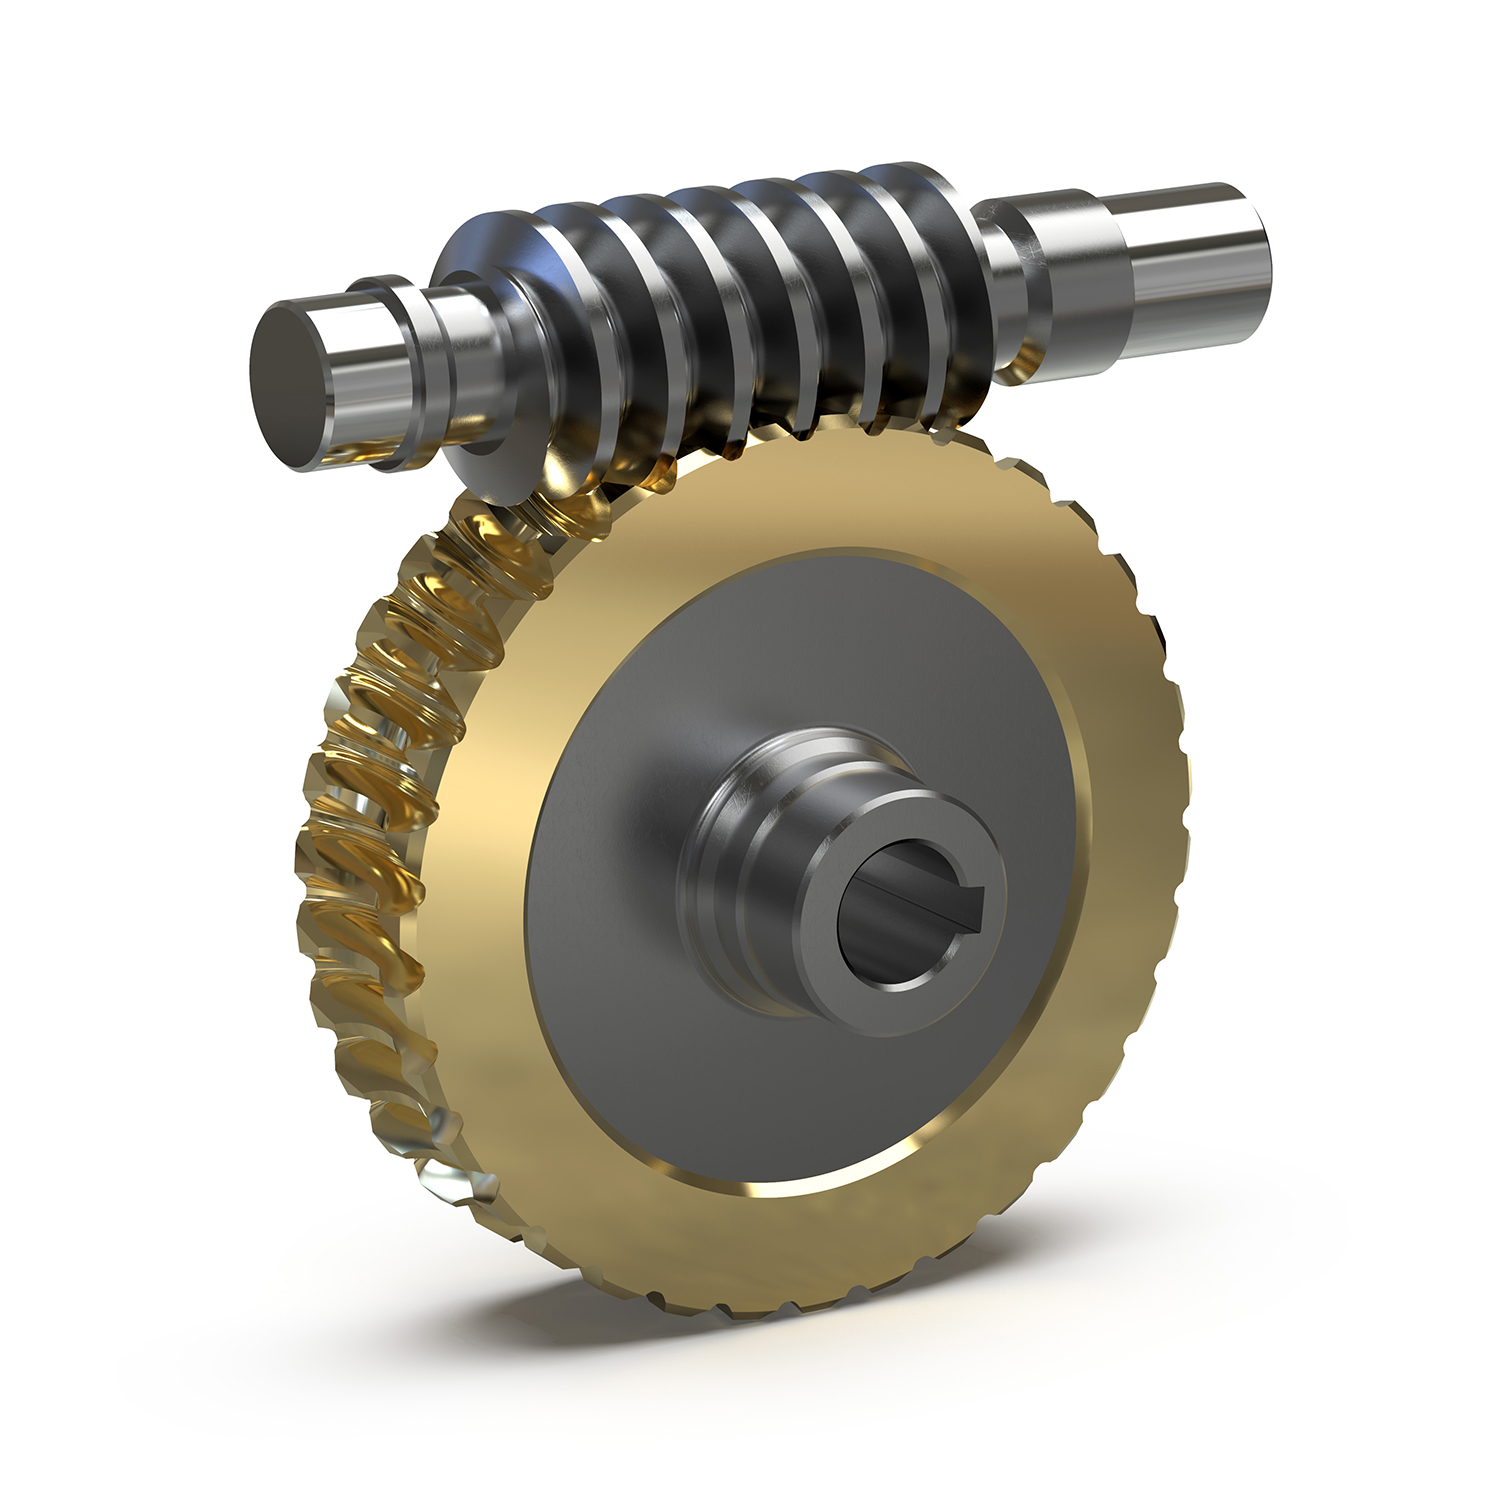 A worm gear consisting of a worm shaft (driven by the motor) and a bronze worm wheel.